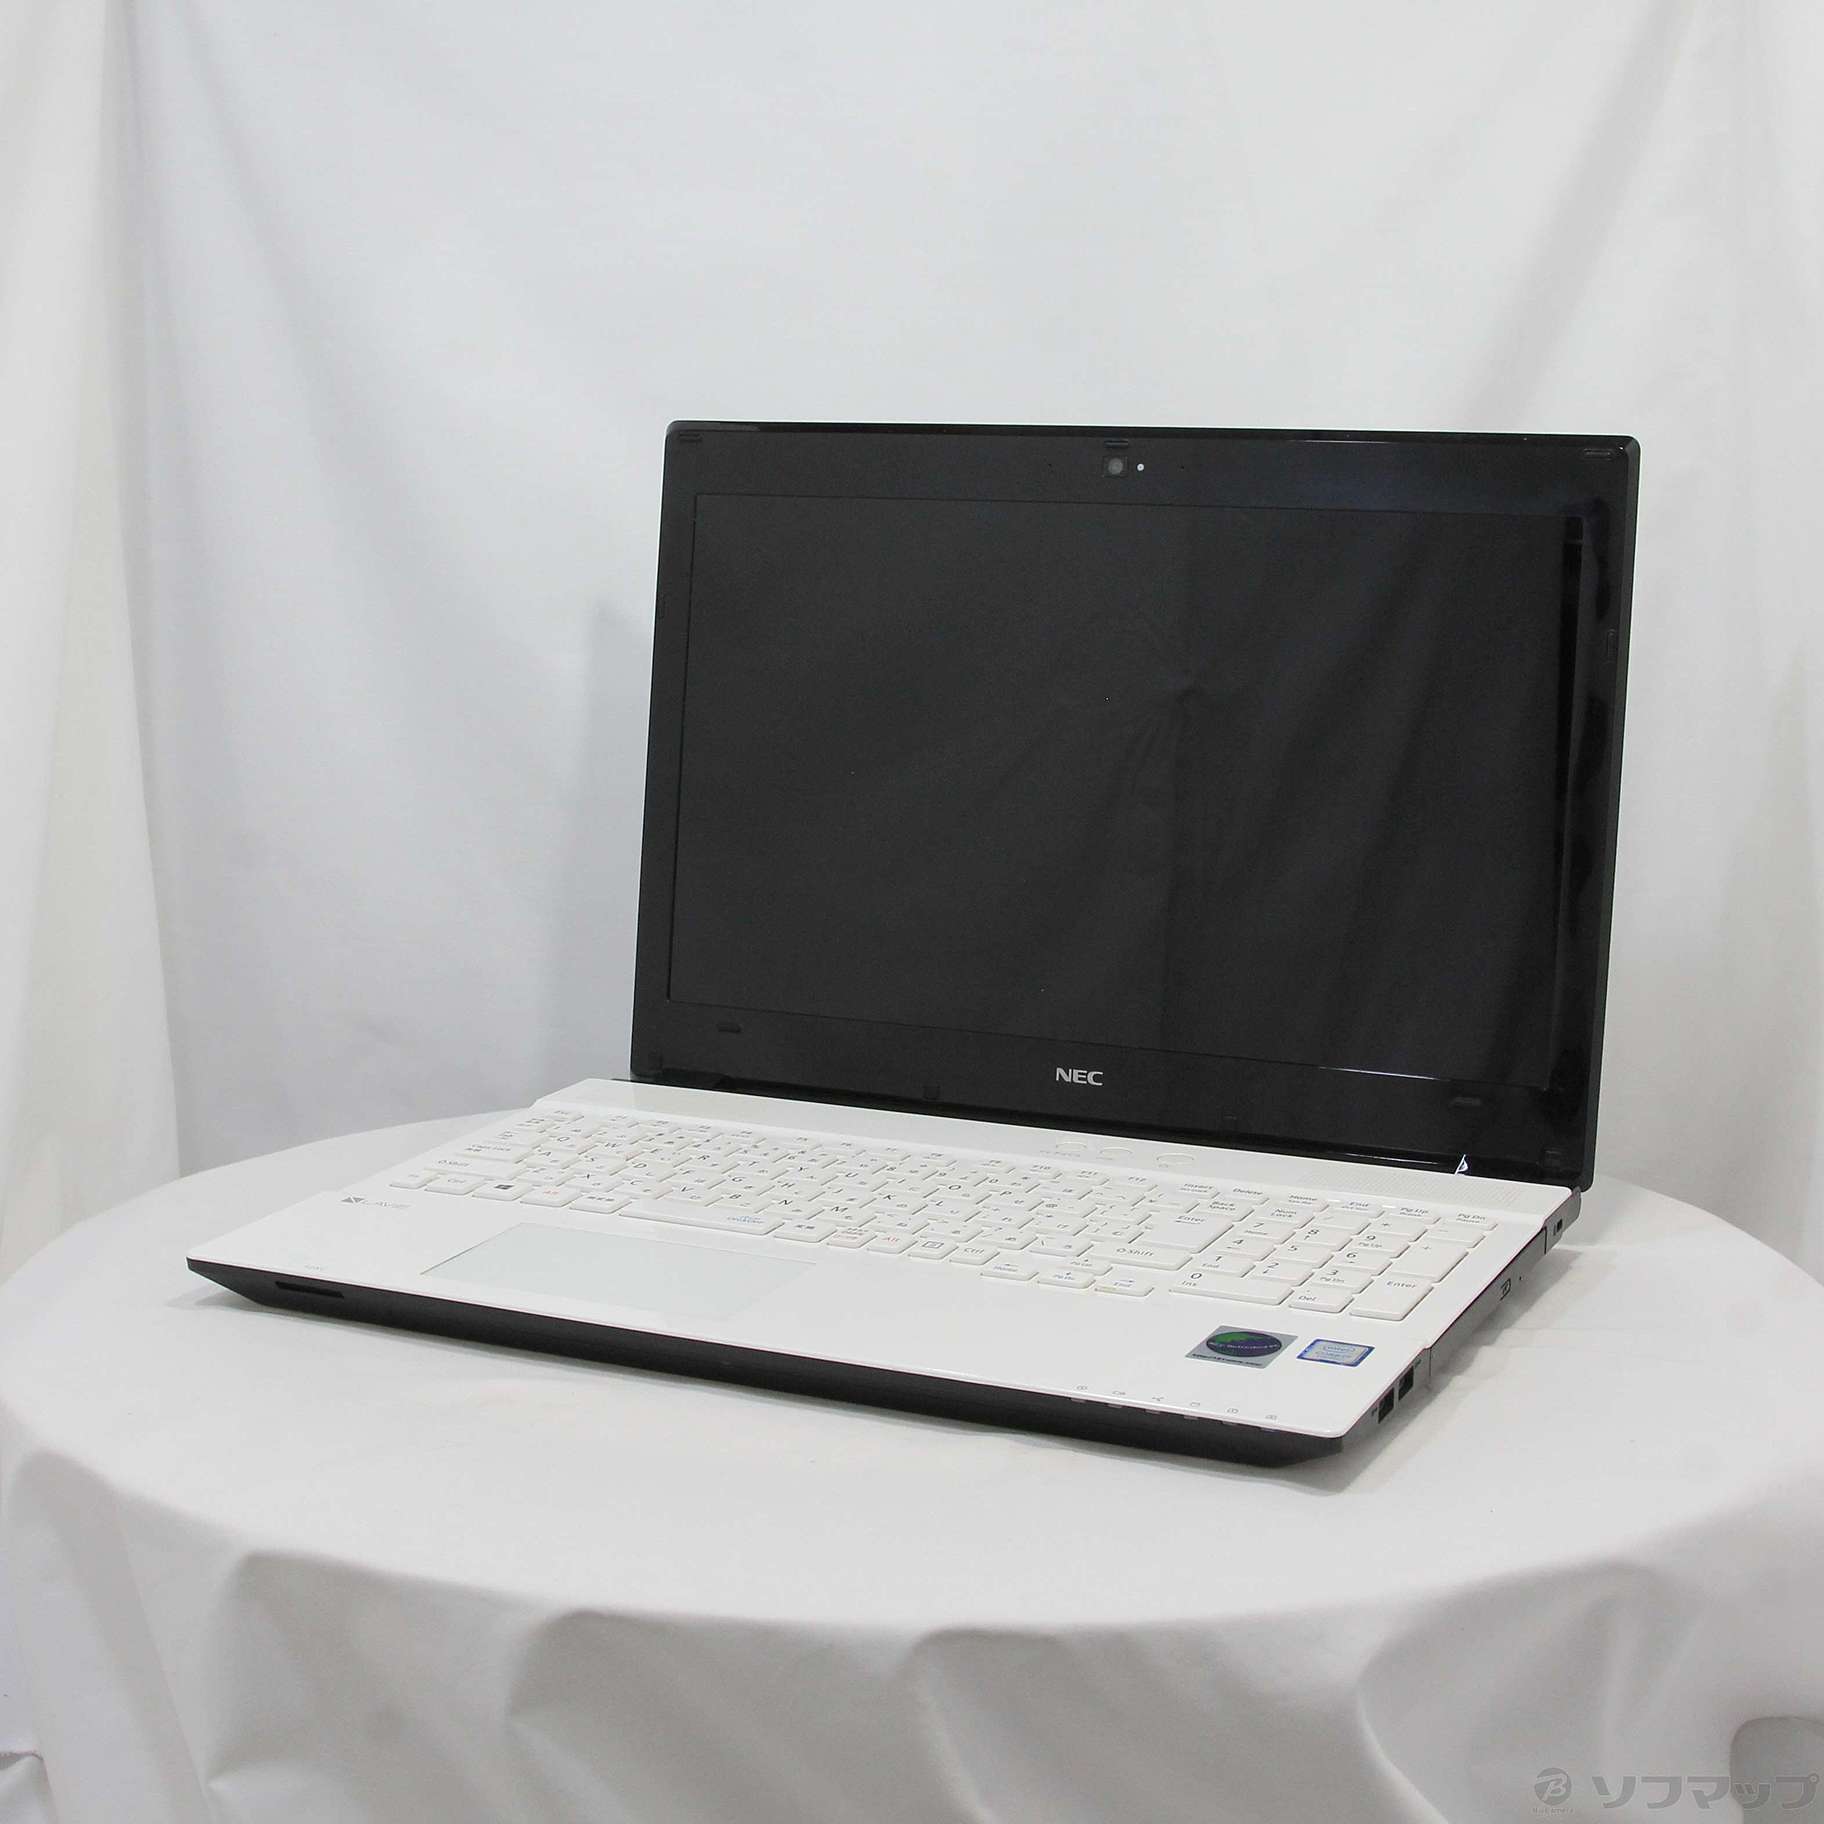 LaVie Note Standard PC-NS650GAW クリスタルホワイト 〔NEC Refreshed PC〕 〔Windows 10〕  ≪メーカー保証あり≫